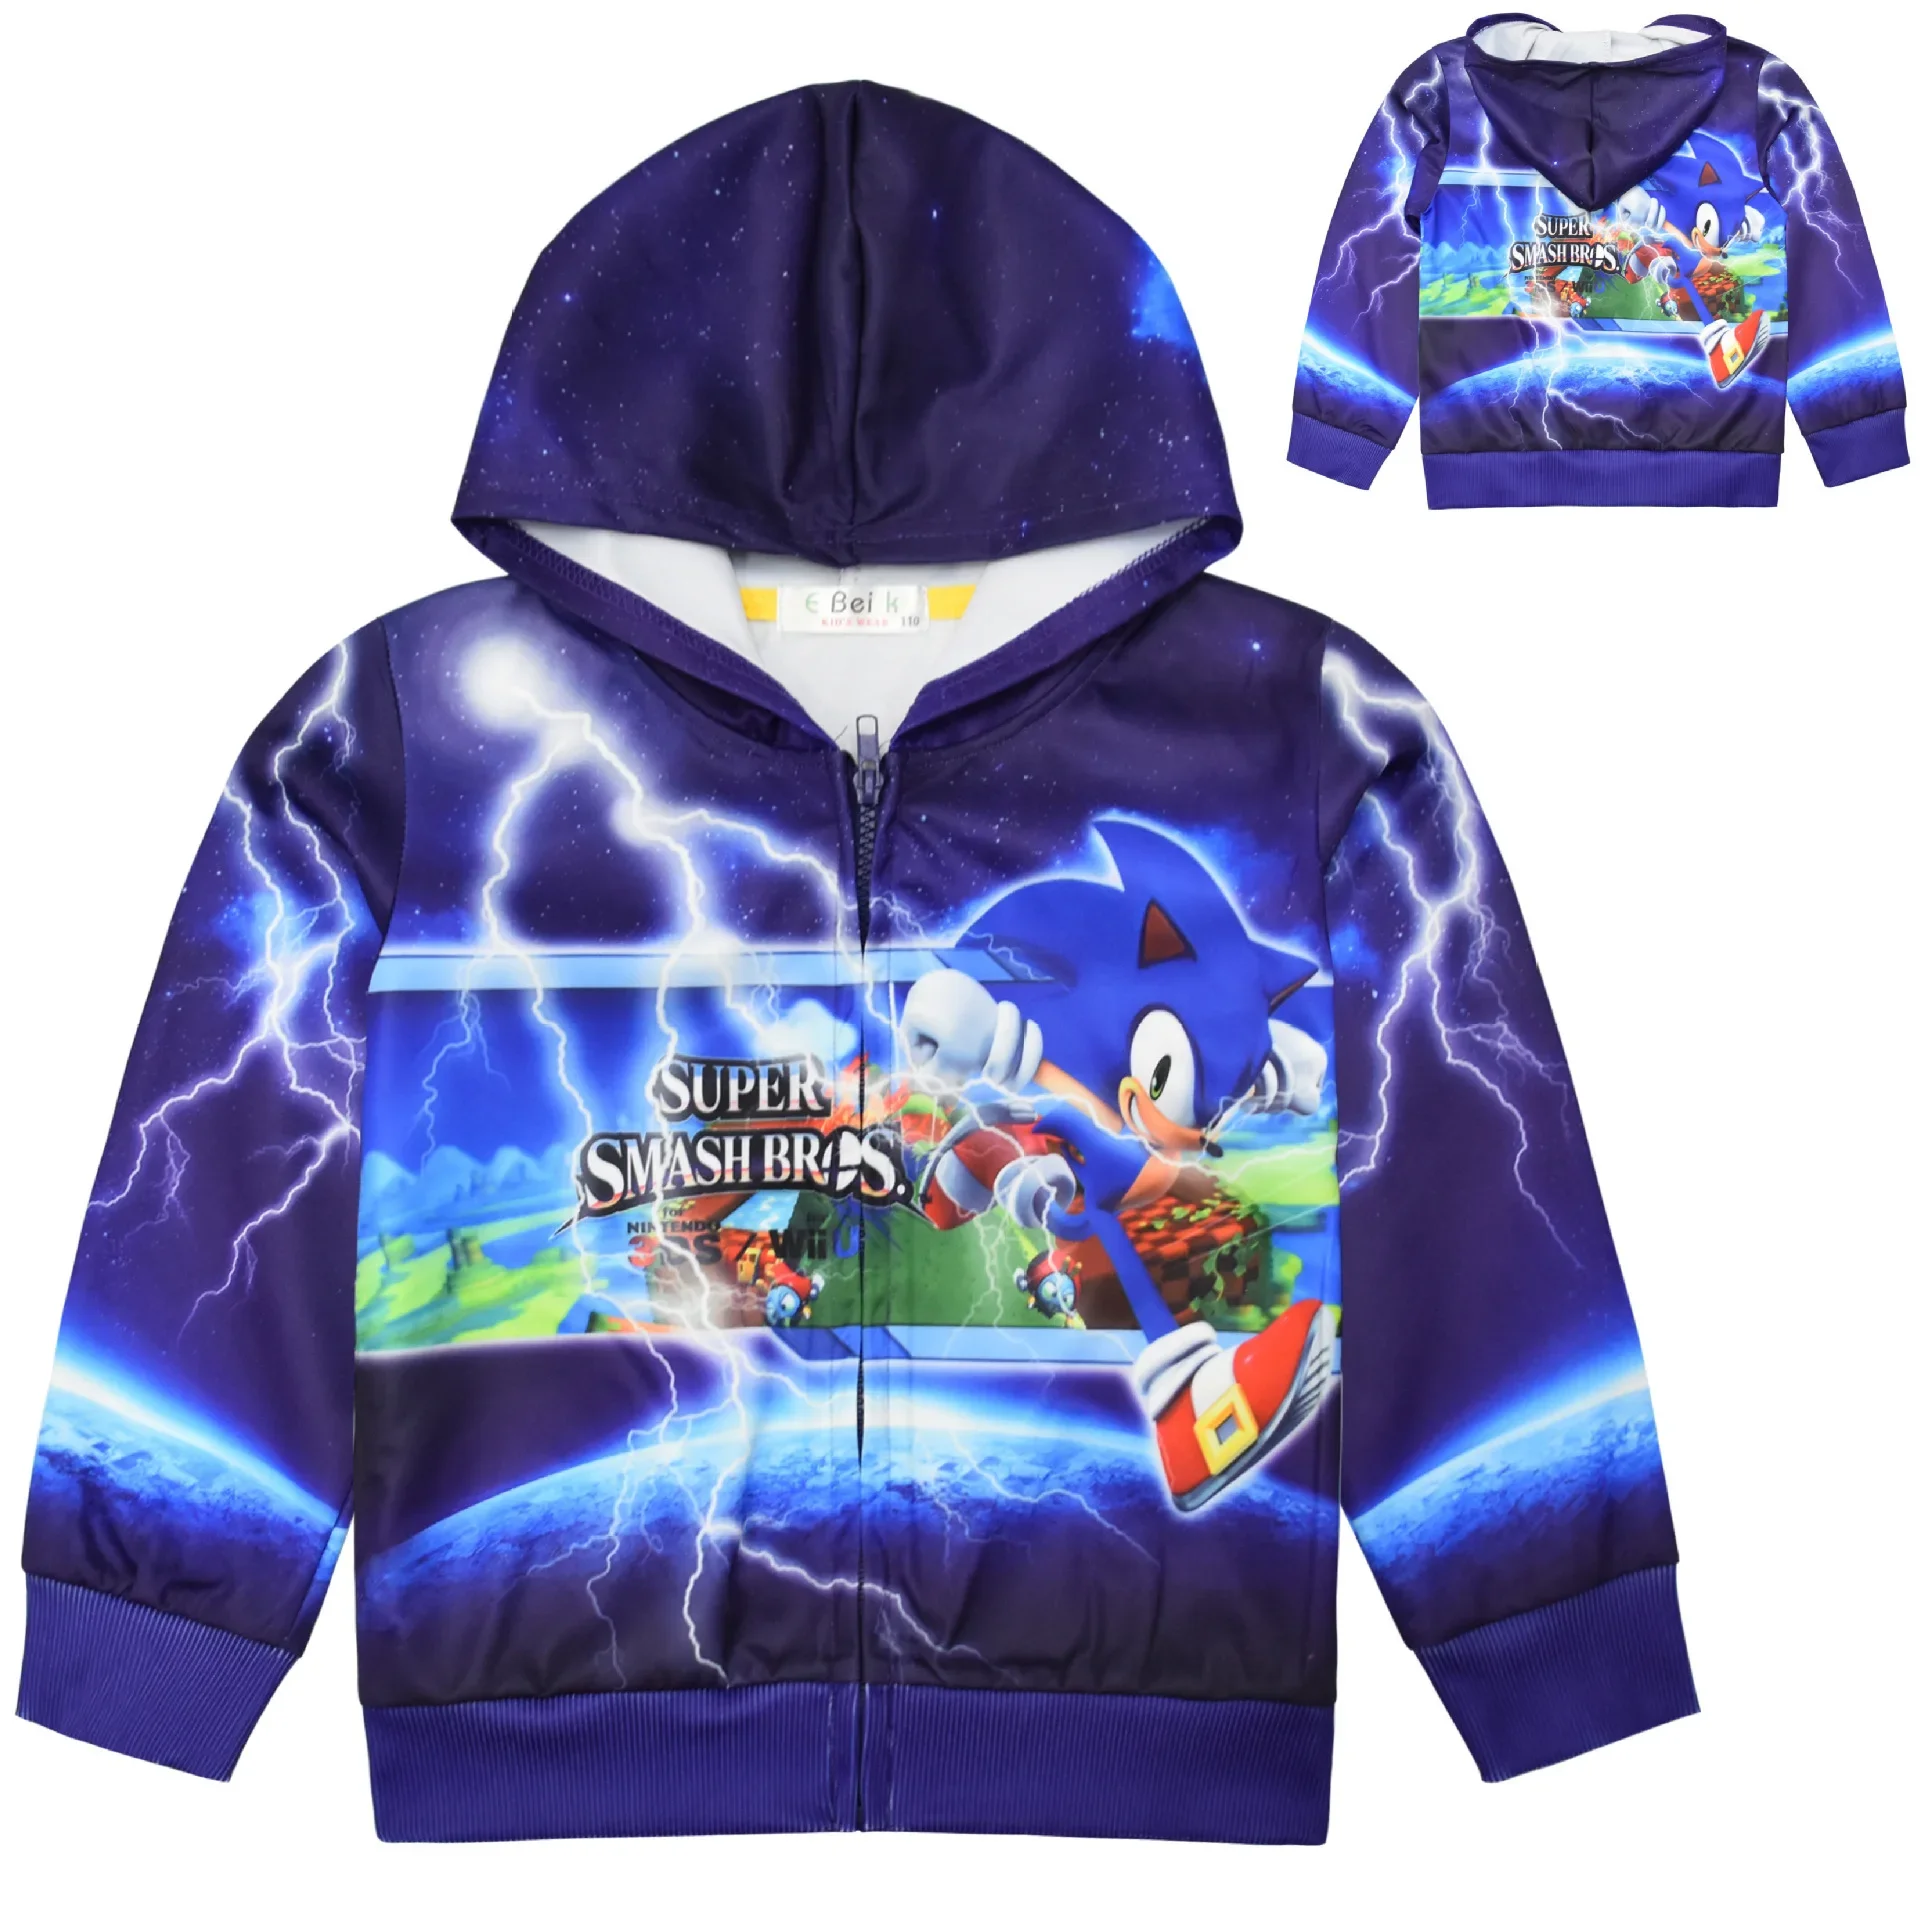 

Halloween Costume Sonic The Hedgehog Sonic Kid Zipper Hooded Jacket Fashion Casual Jacket Children's Clothes Cool Kids Jacket